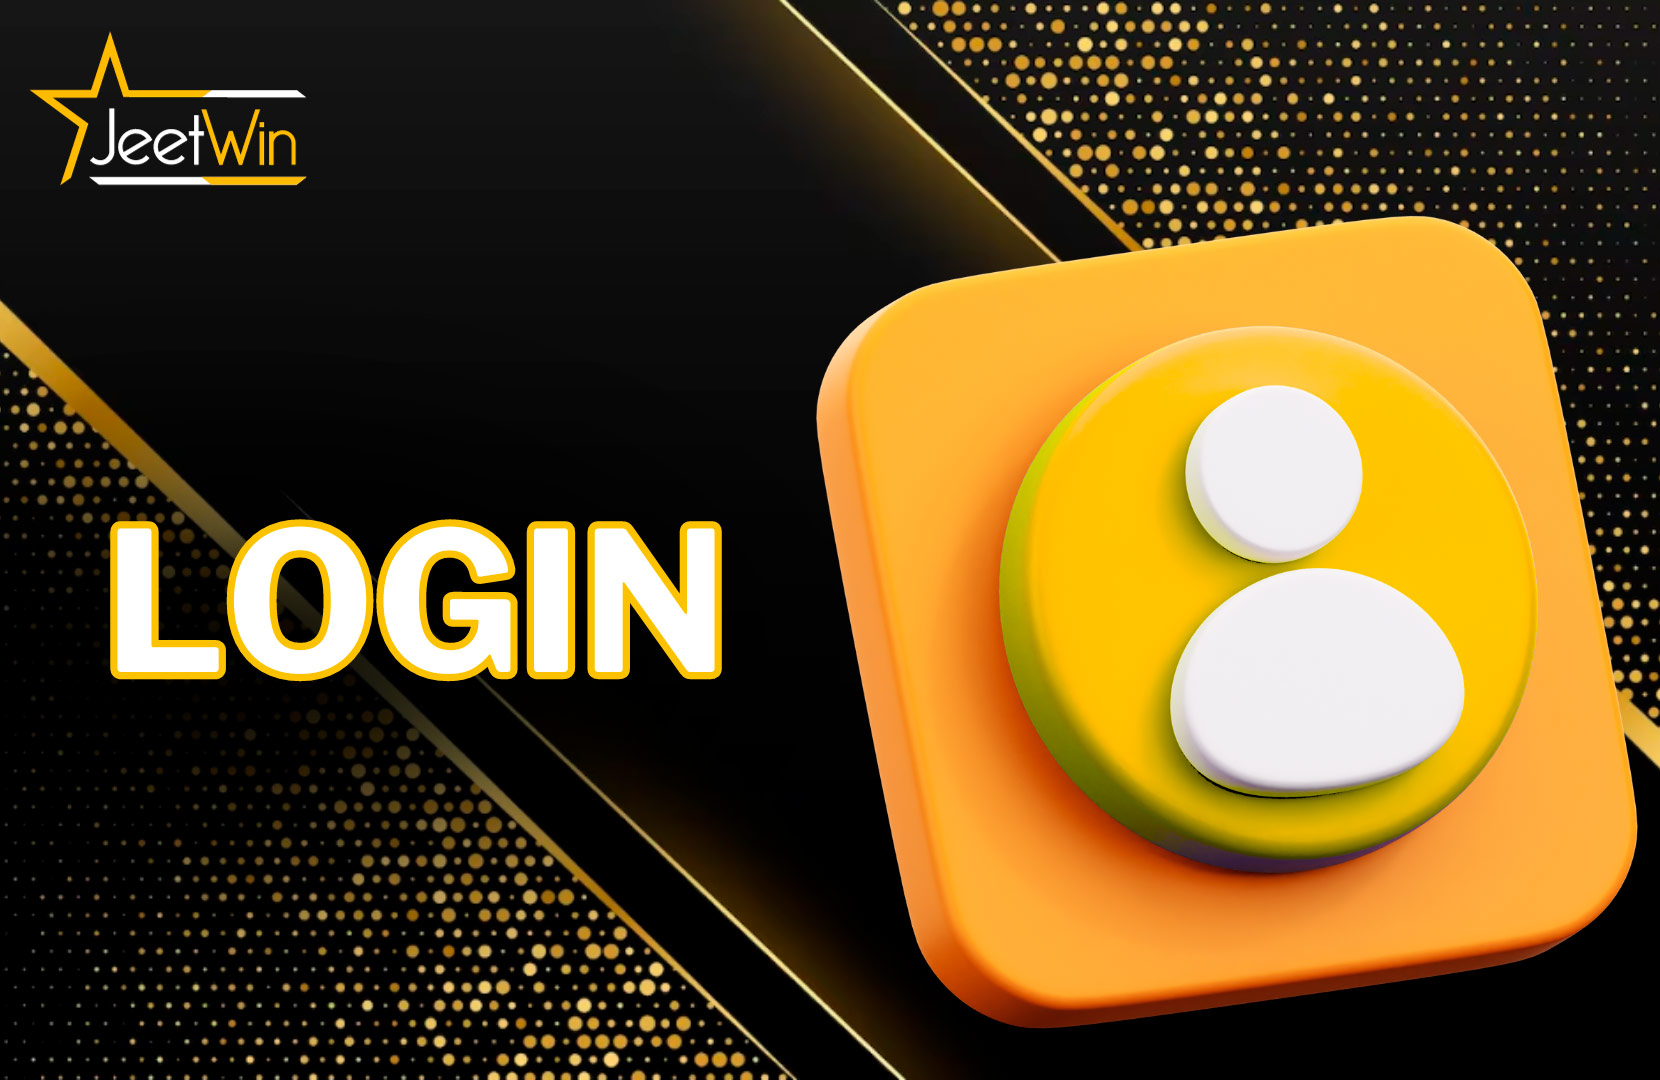 Jeetwin Login - How to Sign In to Your Jeetwin Account Online